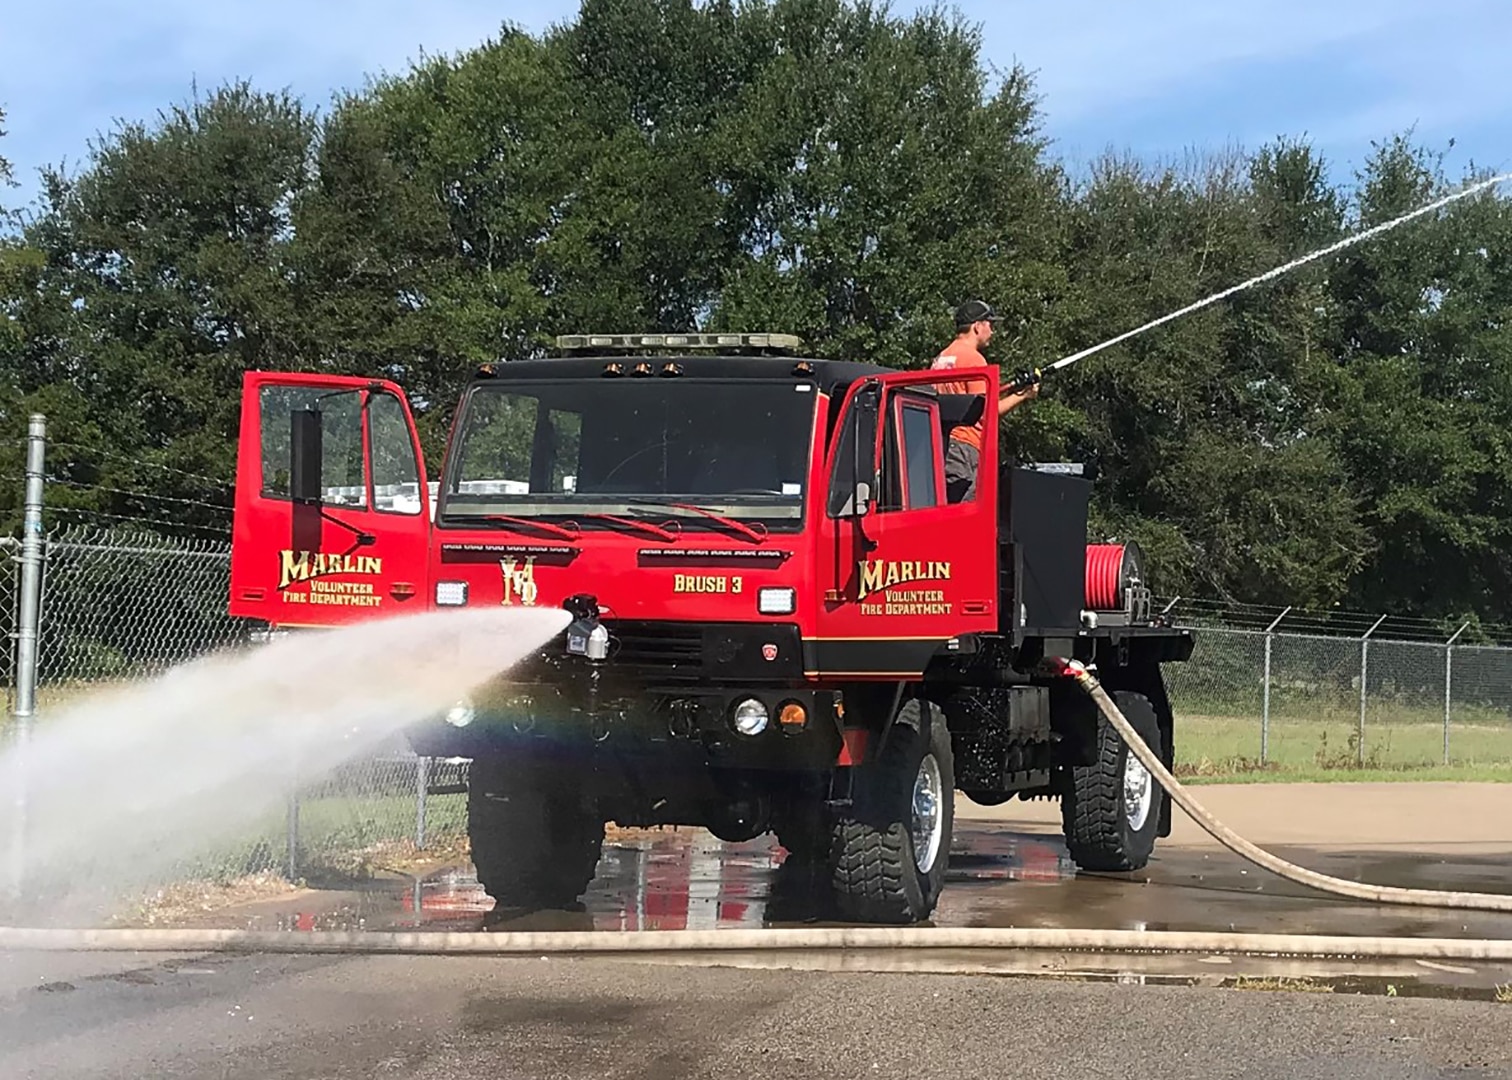 A former military truck displays its new ability to spray water during a demonstration in a parking lot where it sprayed water.